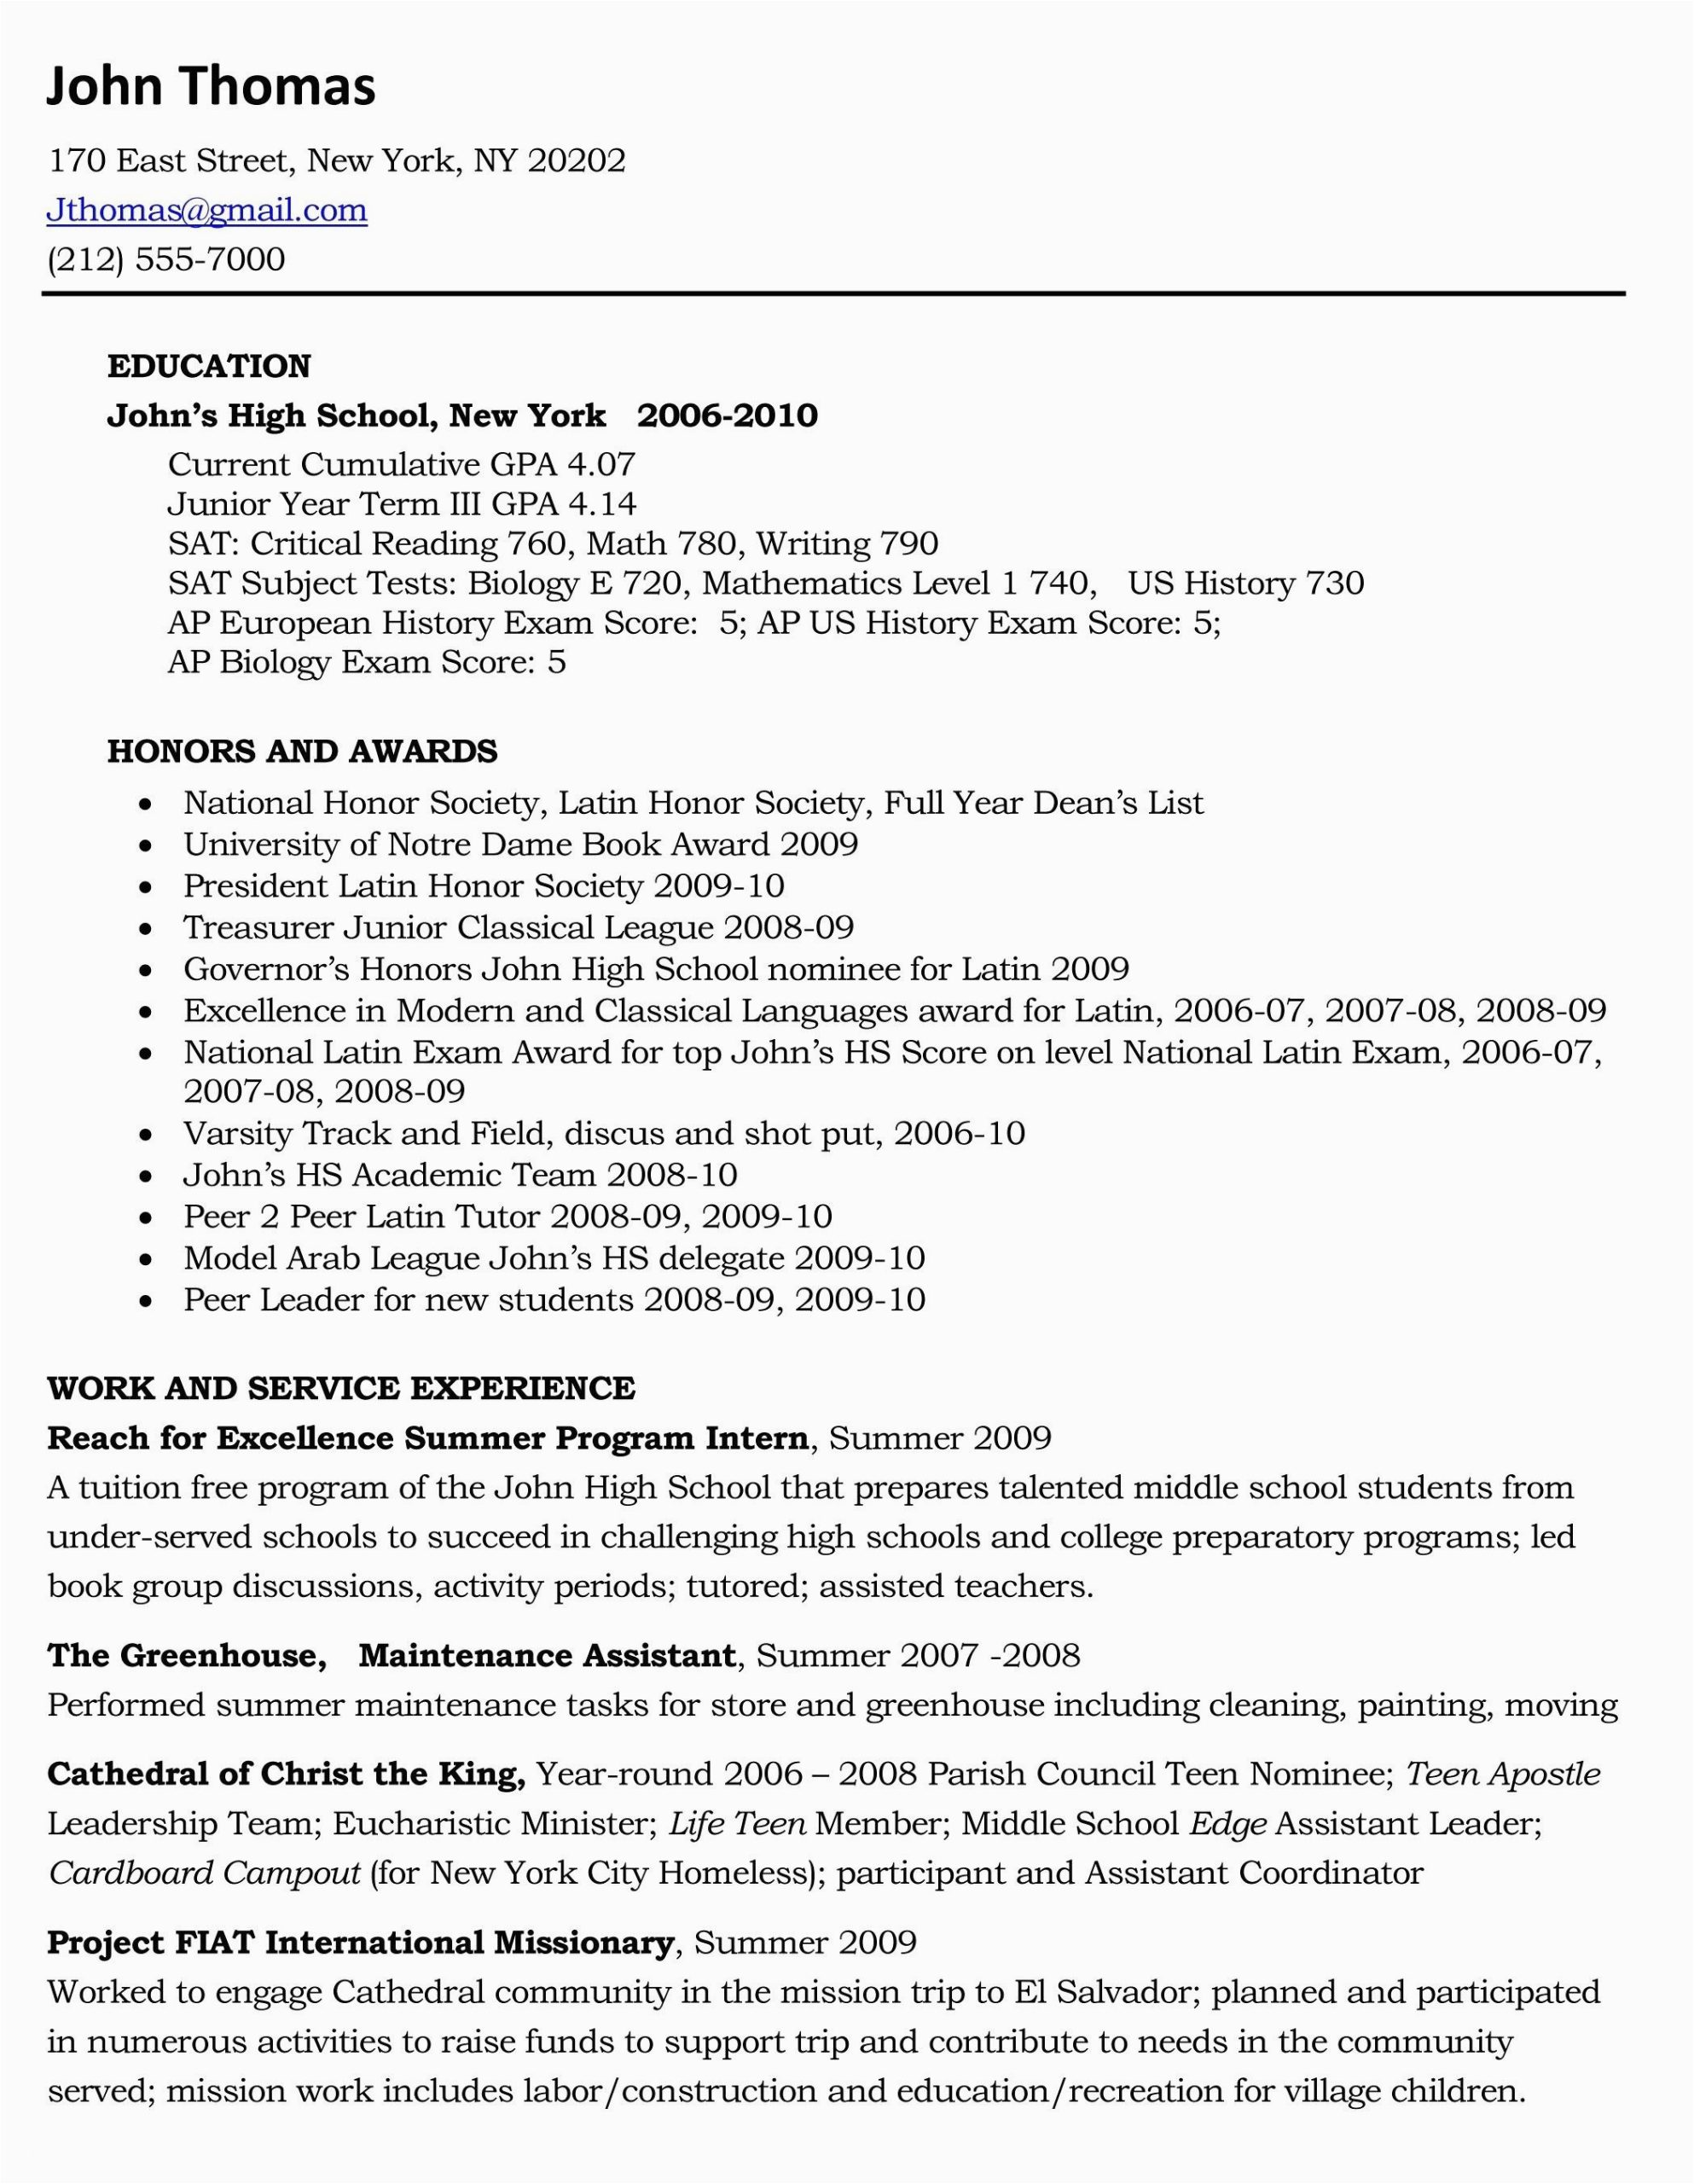 Sample Resumes for Highschool Students Entering College Sample Resume Xls format Resume format